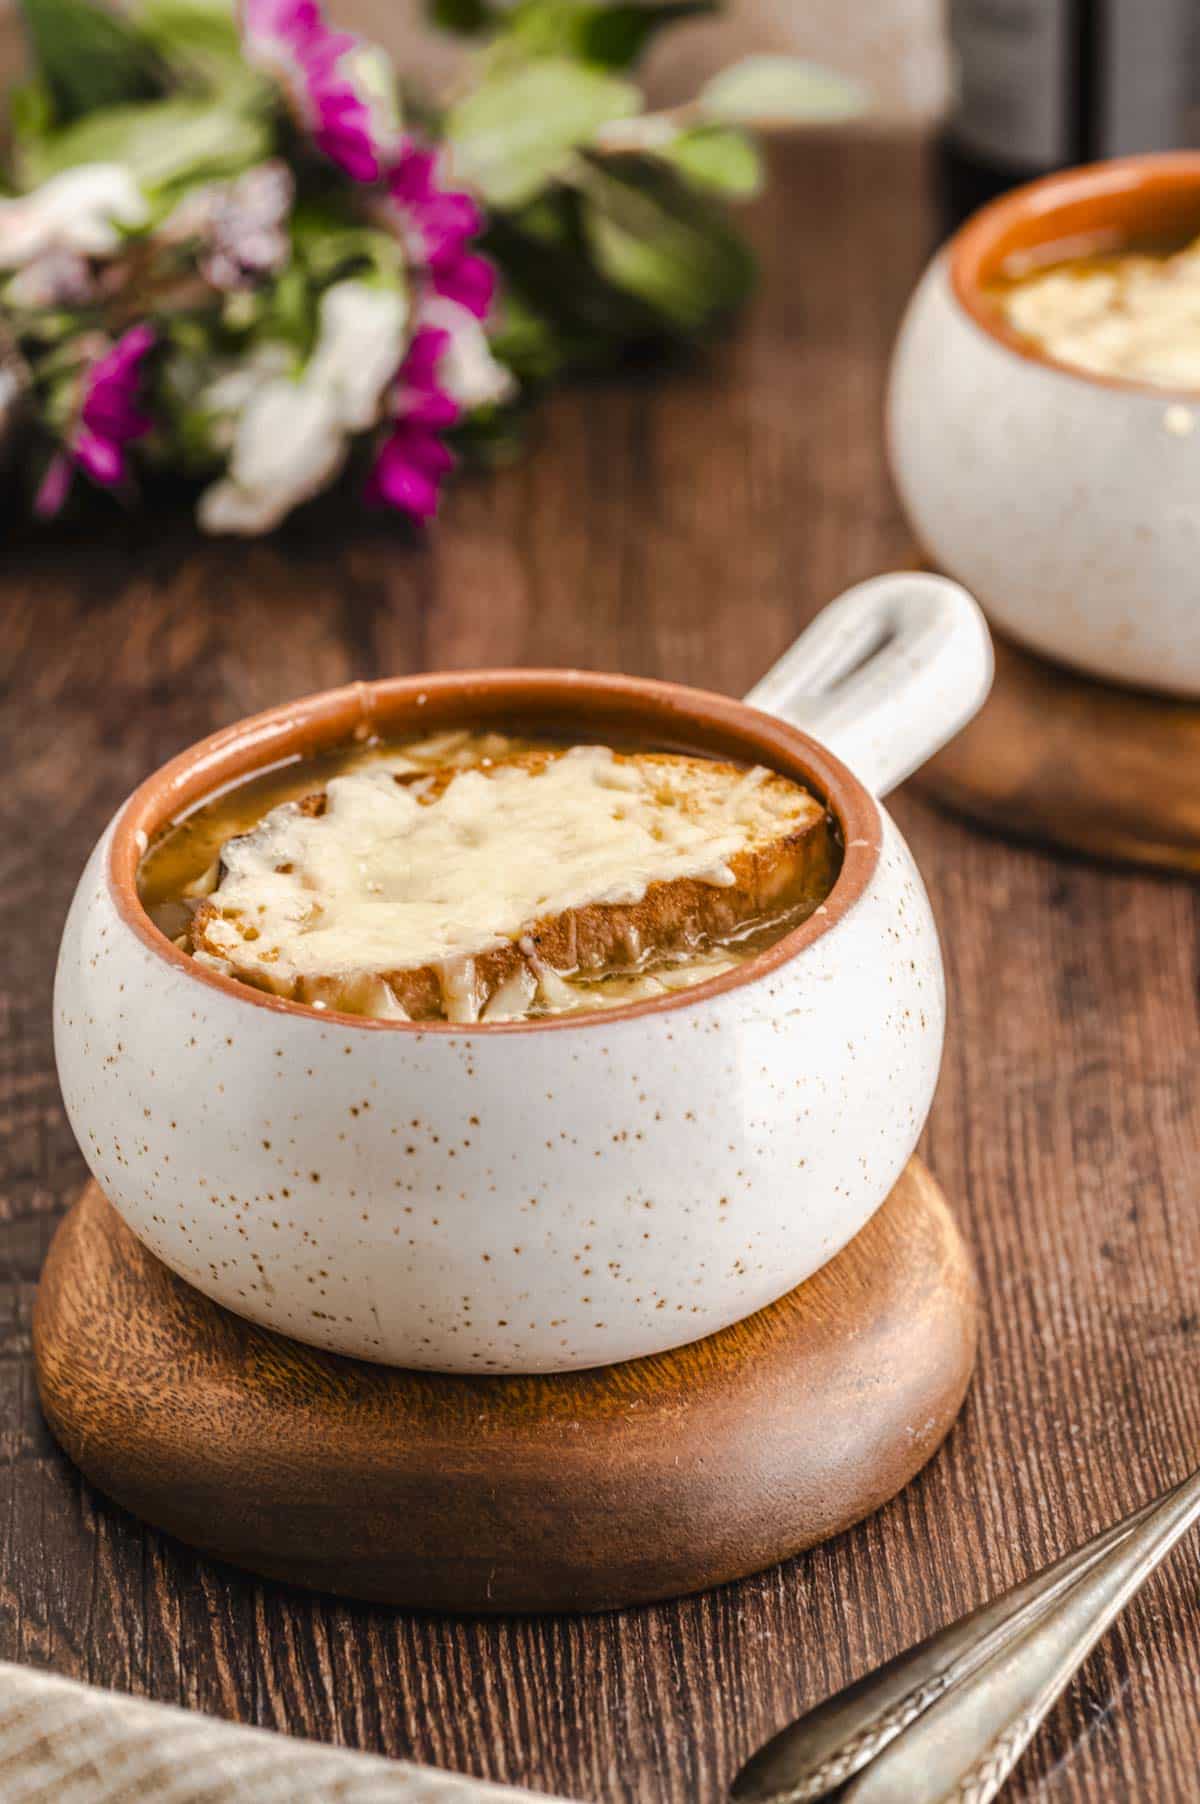 We Tried Celebrity Chef French Onion Soup Recipes - Here's the Best